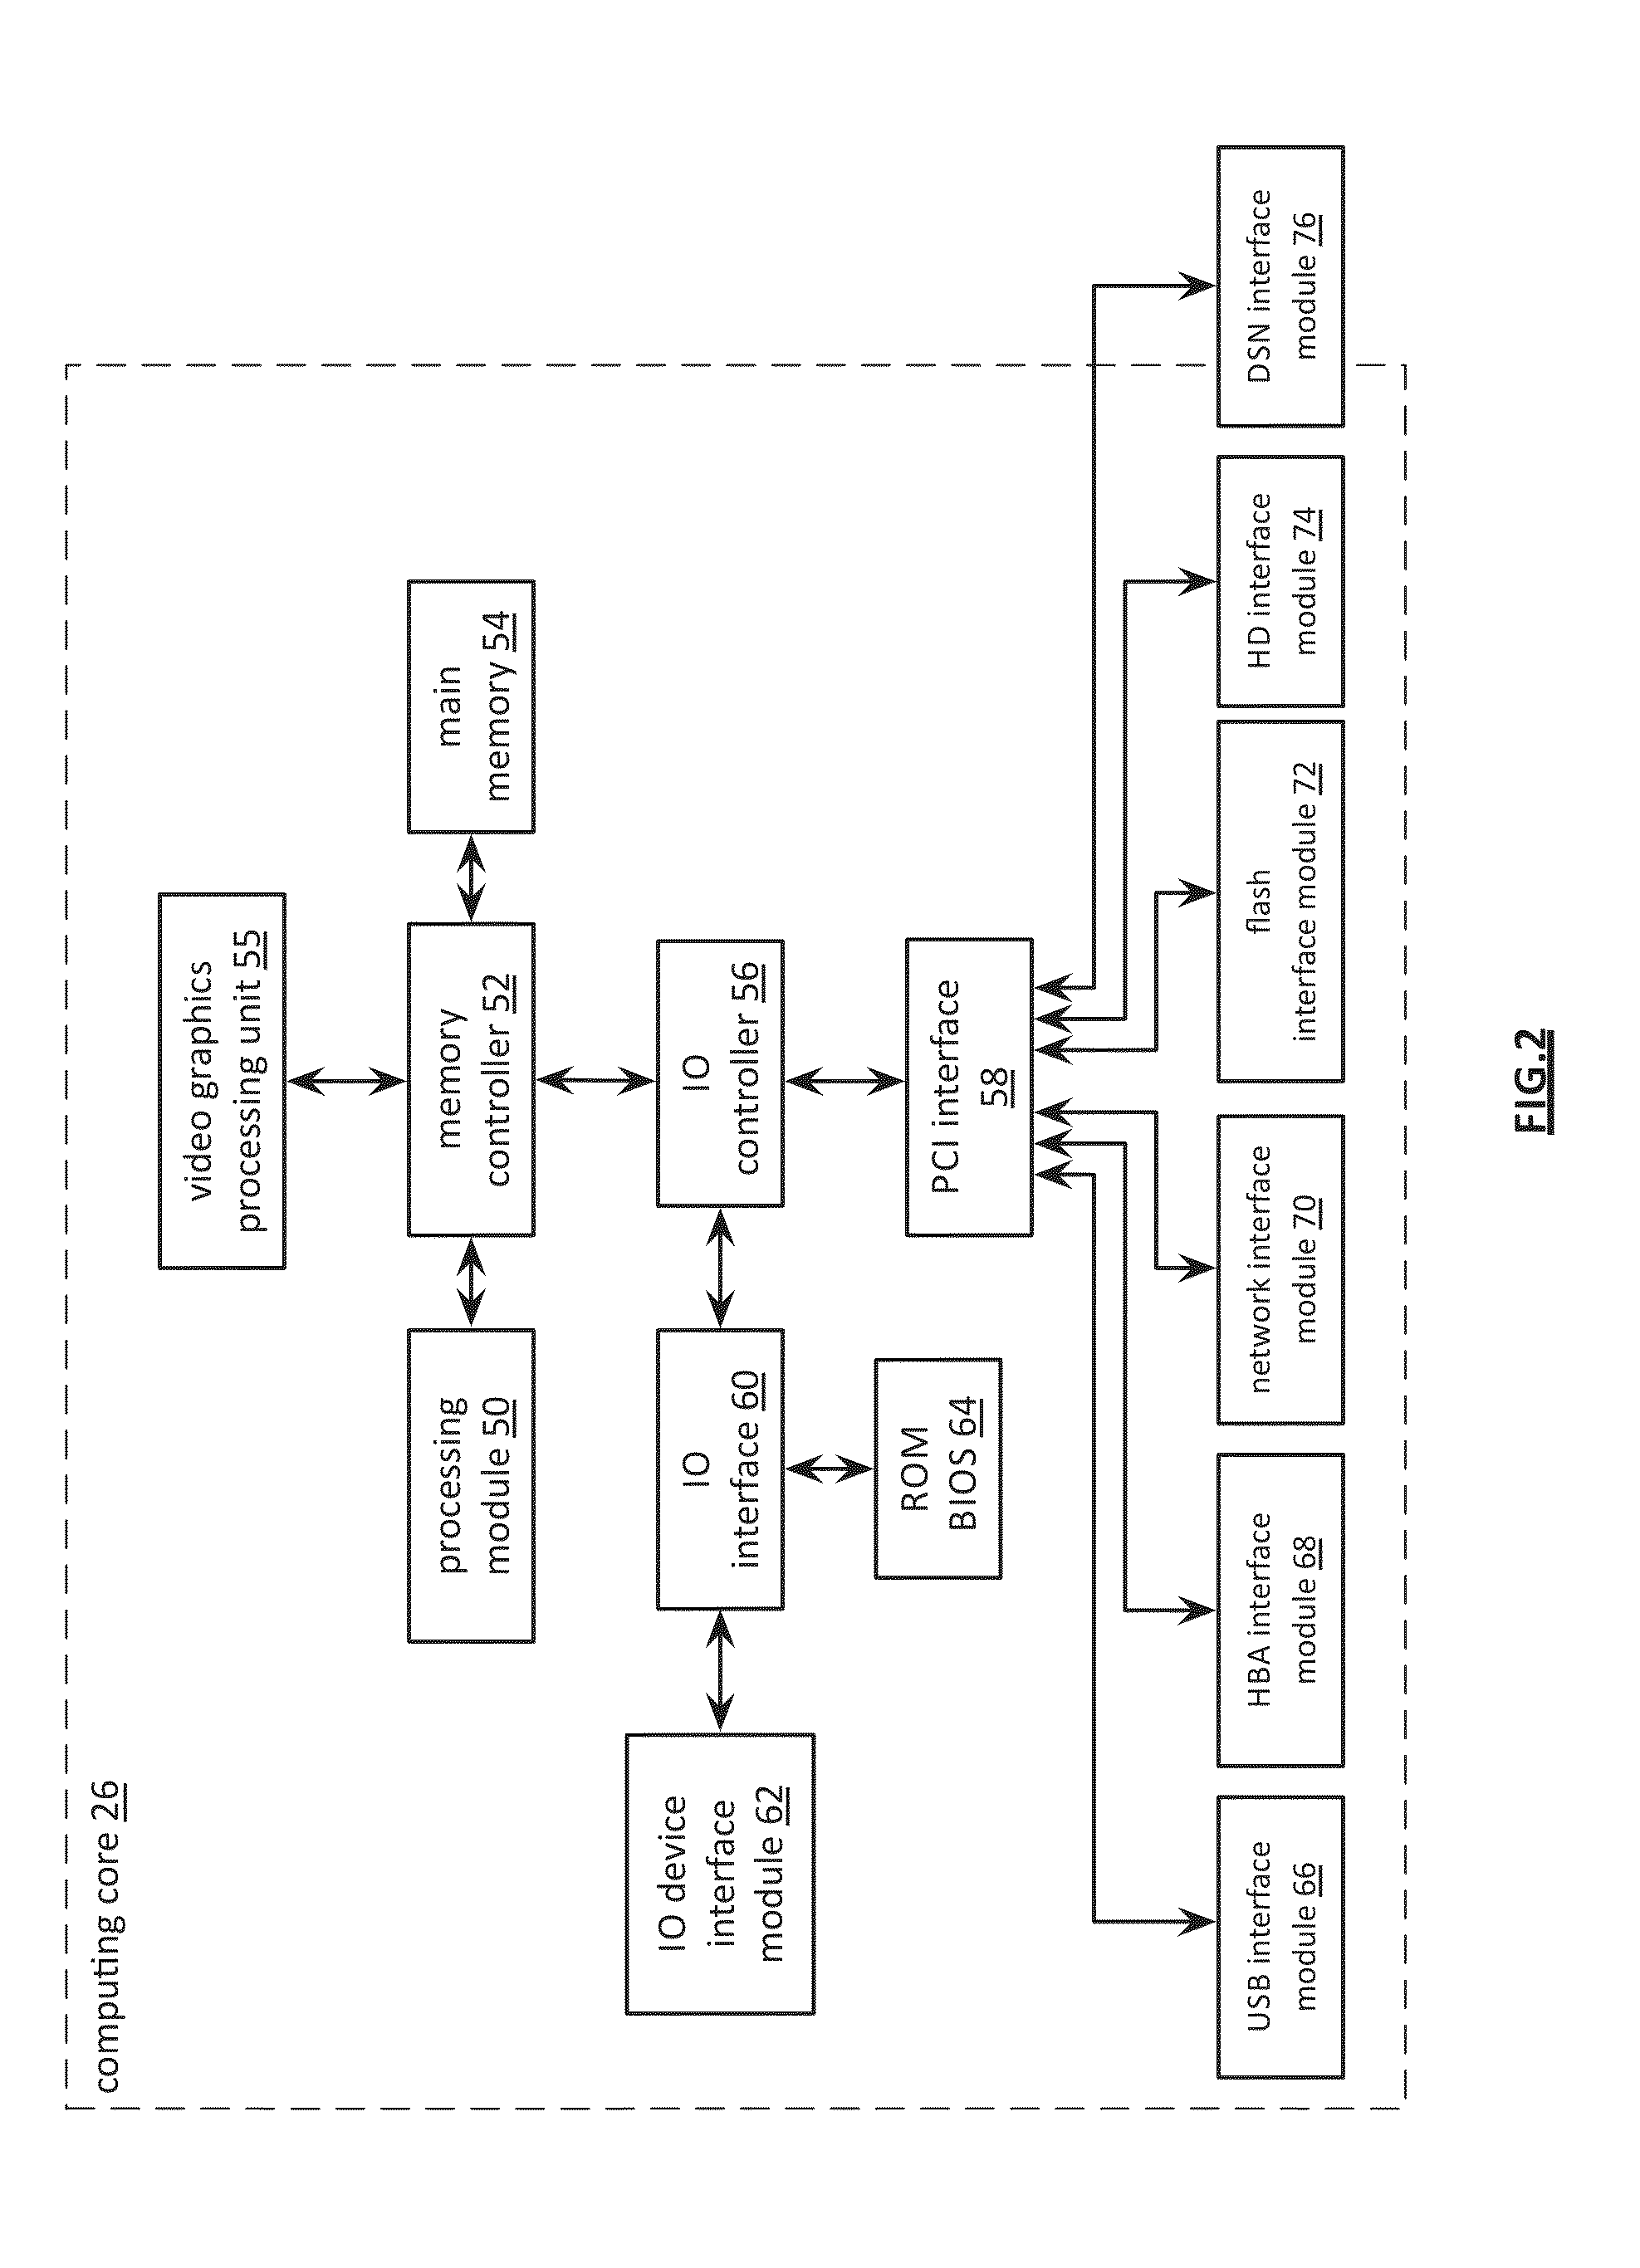 Transferring Encoded Data Slices in a Distributed Storage Network